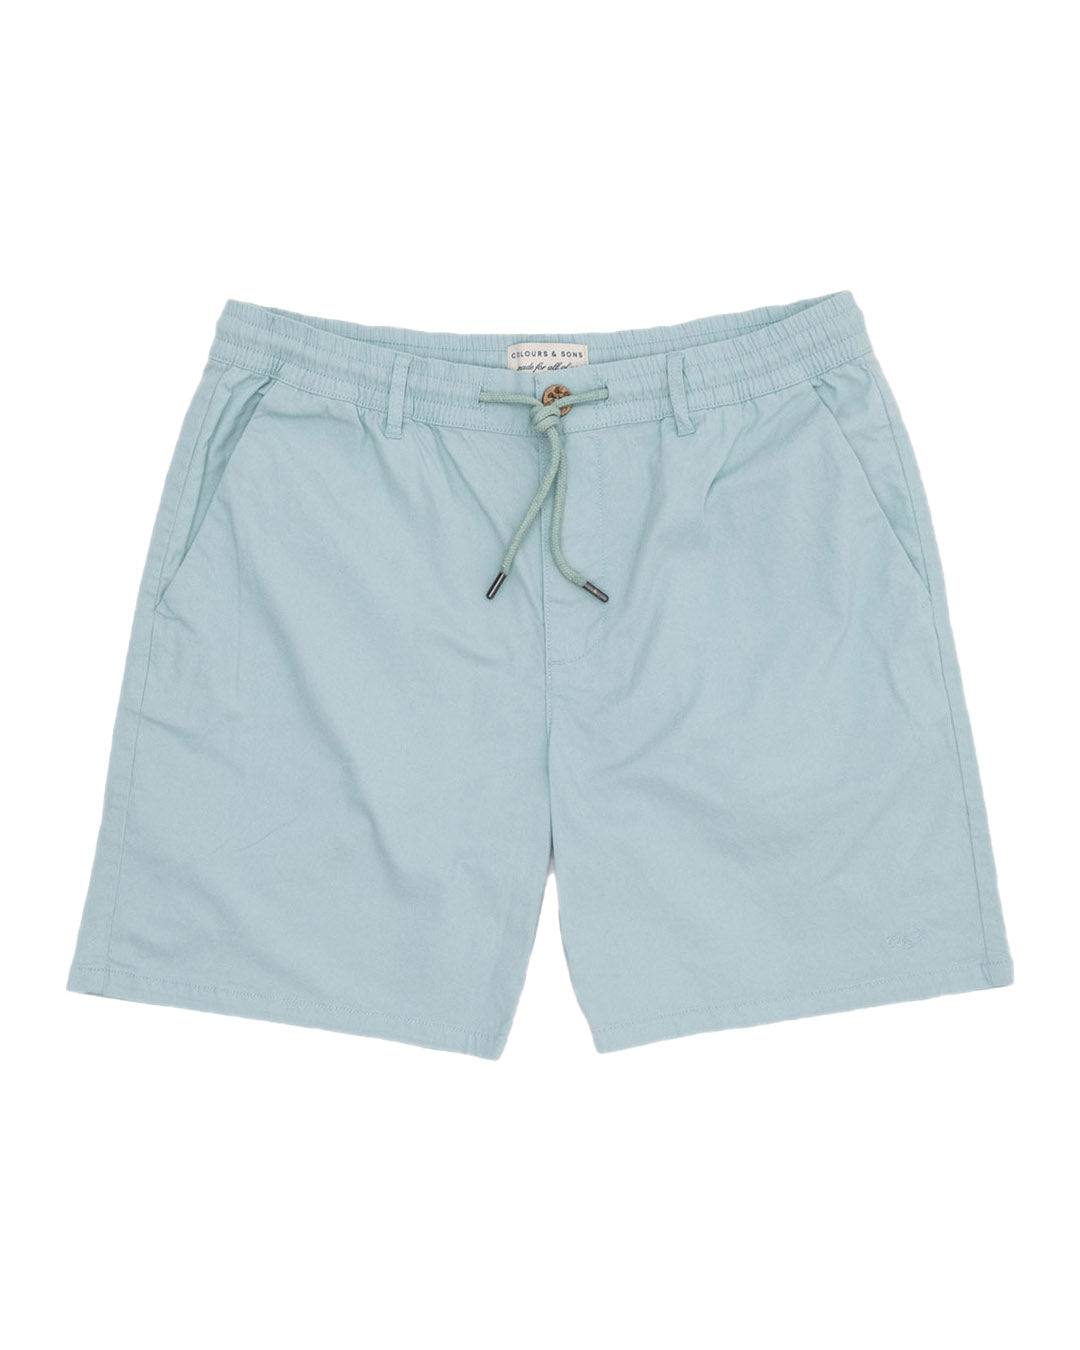 Shorts Light Twill in Mist Shorts Colours and Sons   